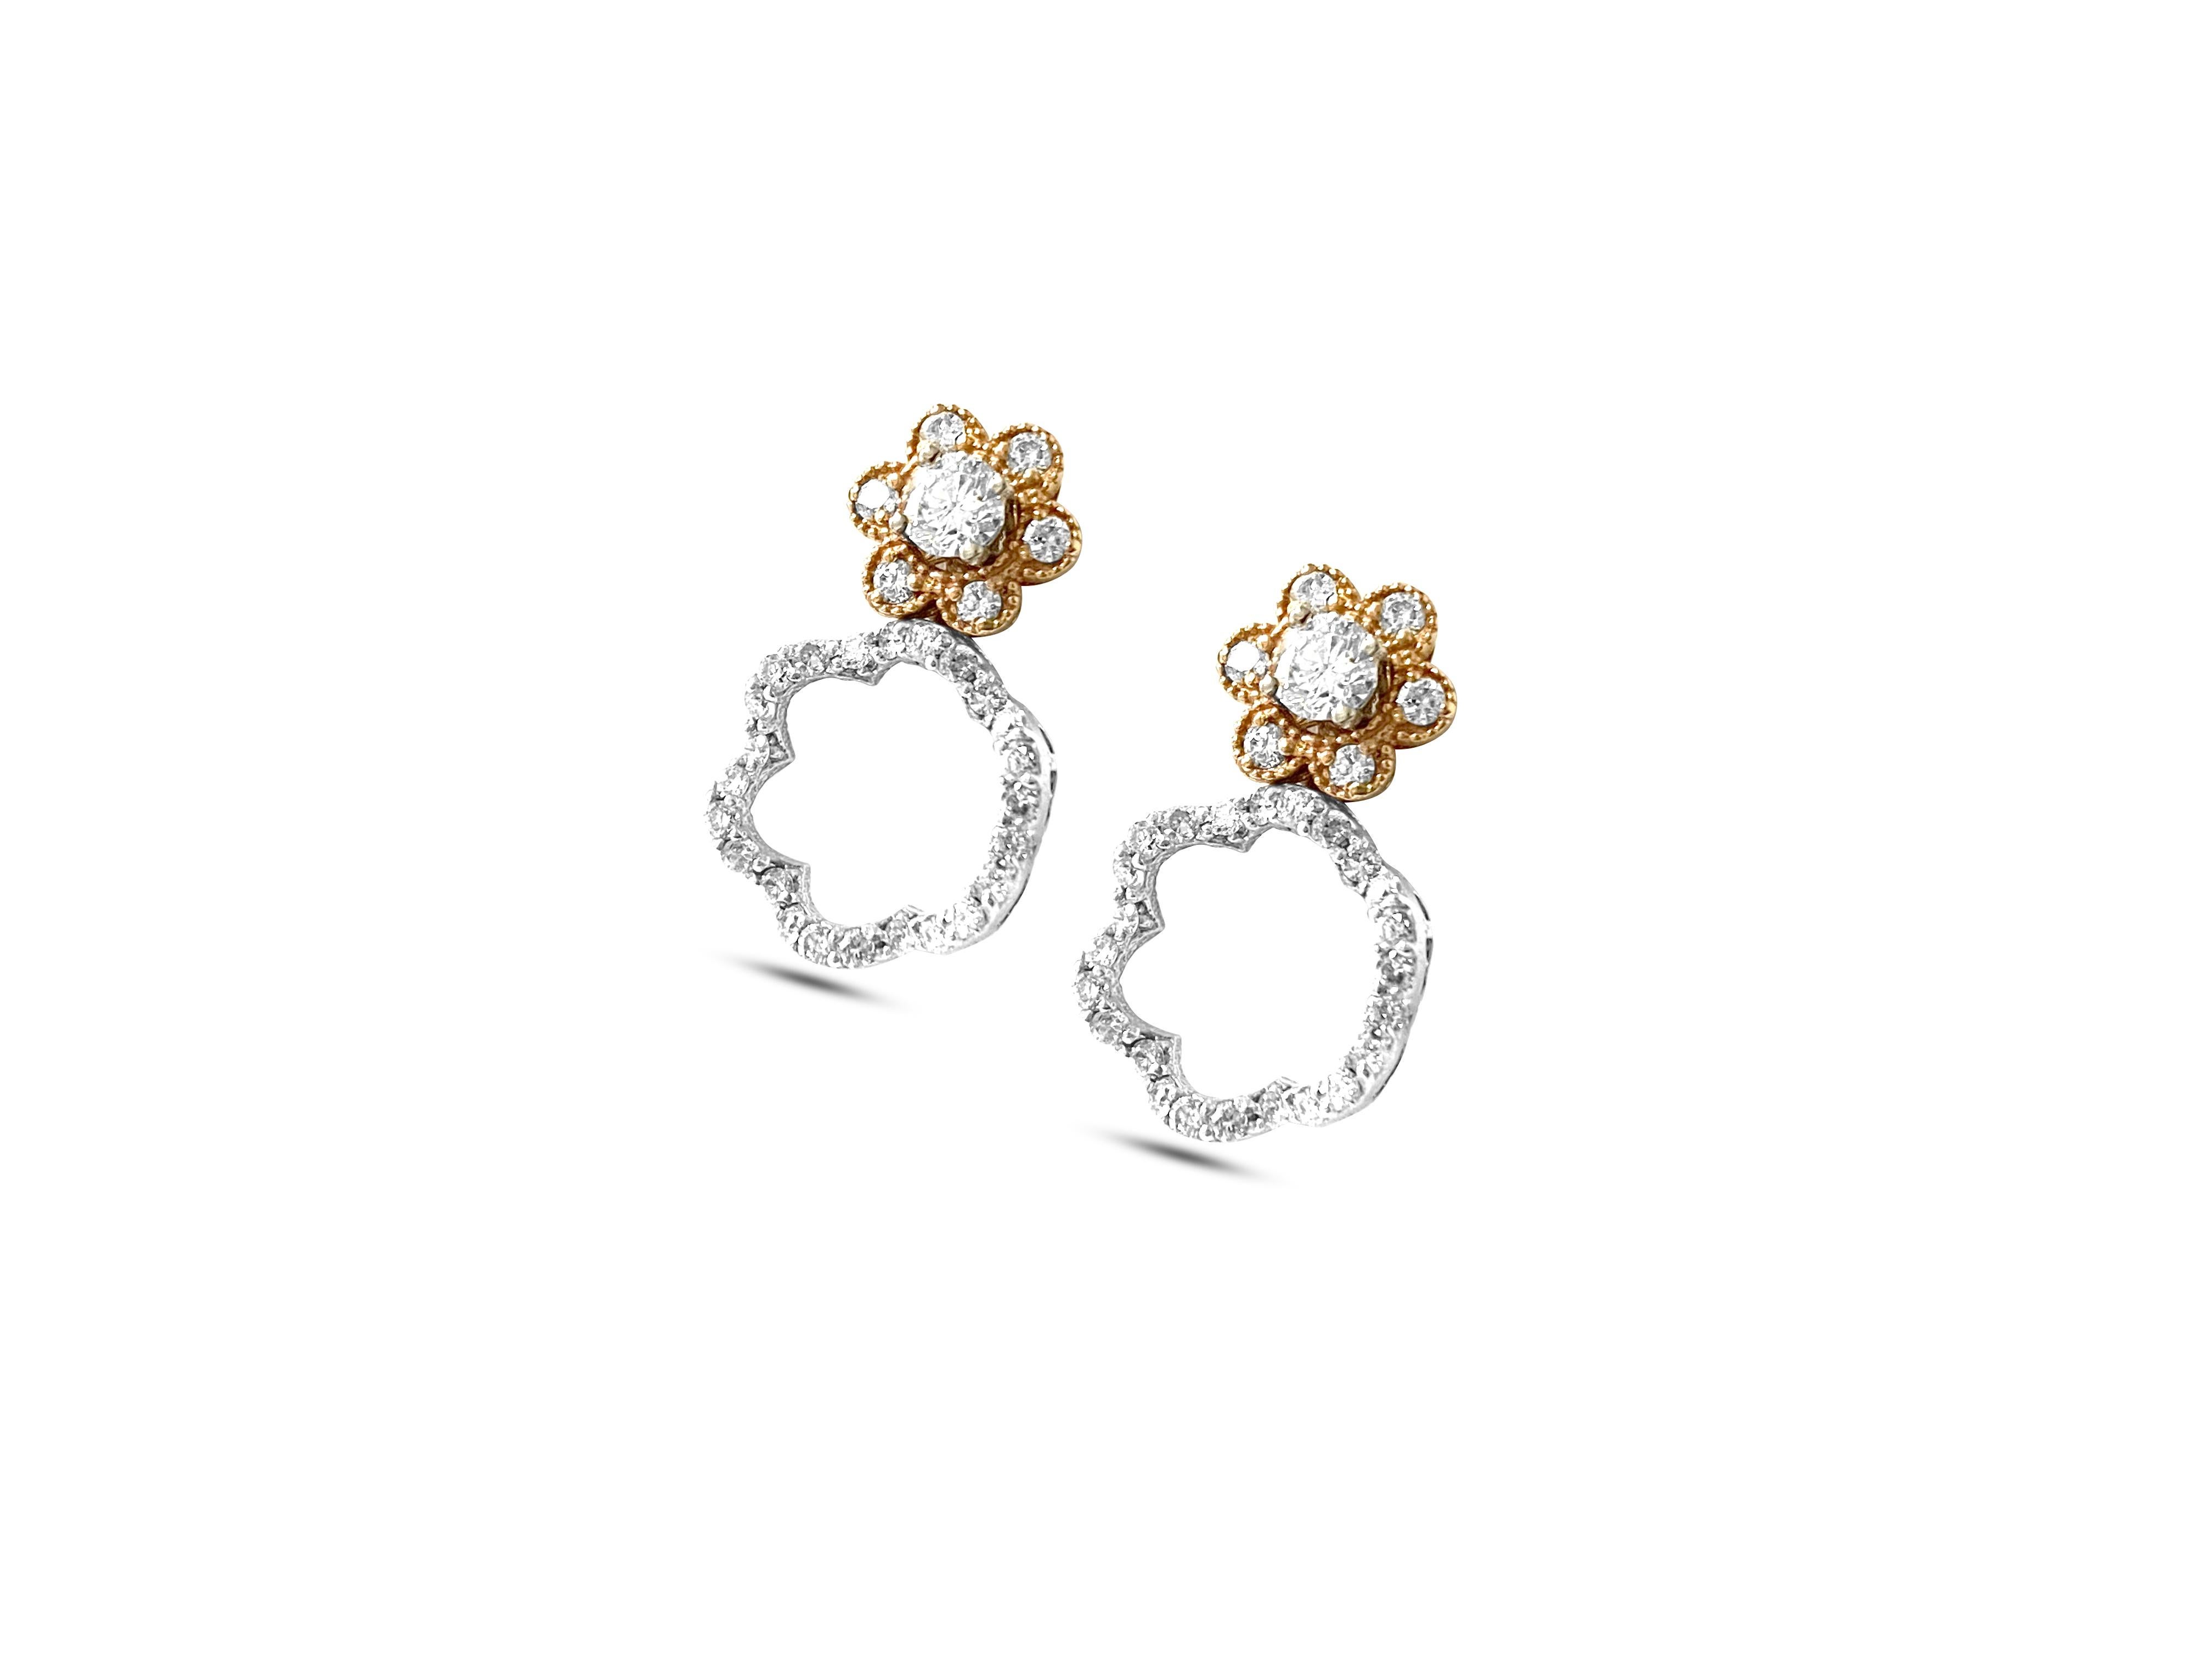 Metal: 14K white and rose gold (two tone)

Diamond: 1.50cwt. VS clarity and G color. 100% natural earth mined diamonds. Round brilliant cut.

Can be styled 4 ways. Dangle, Studs with bezel, flower style studs and simple but classic solitaire